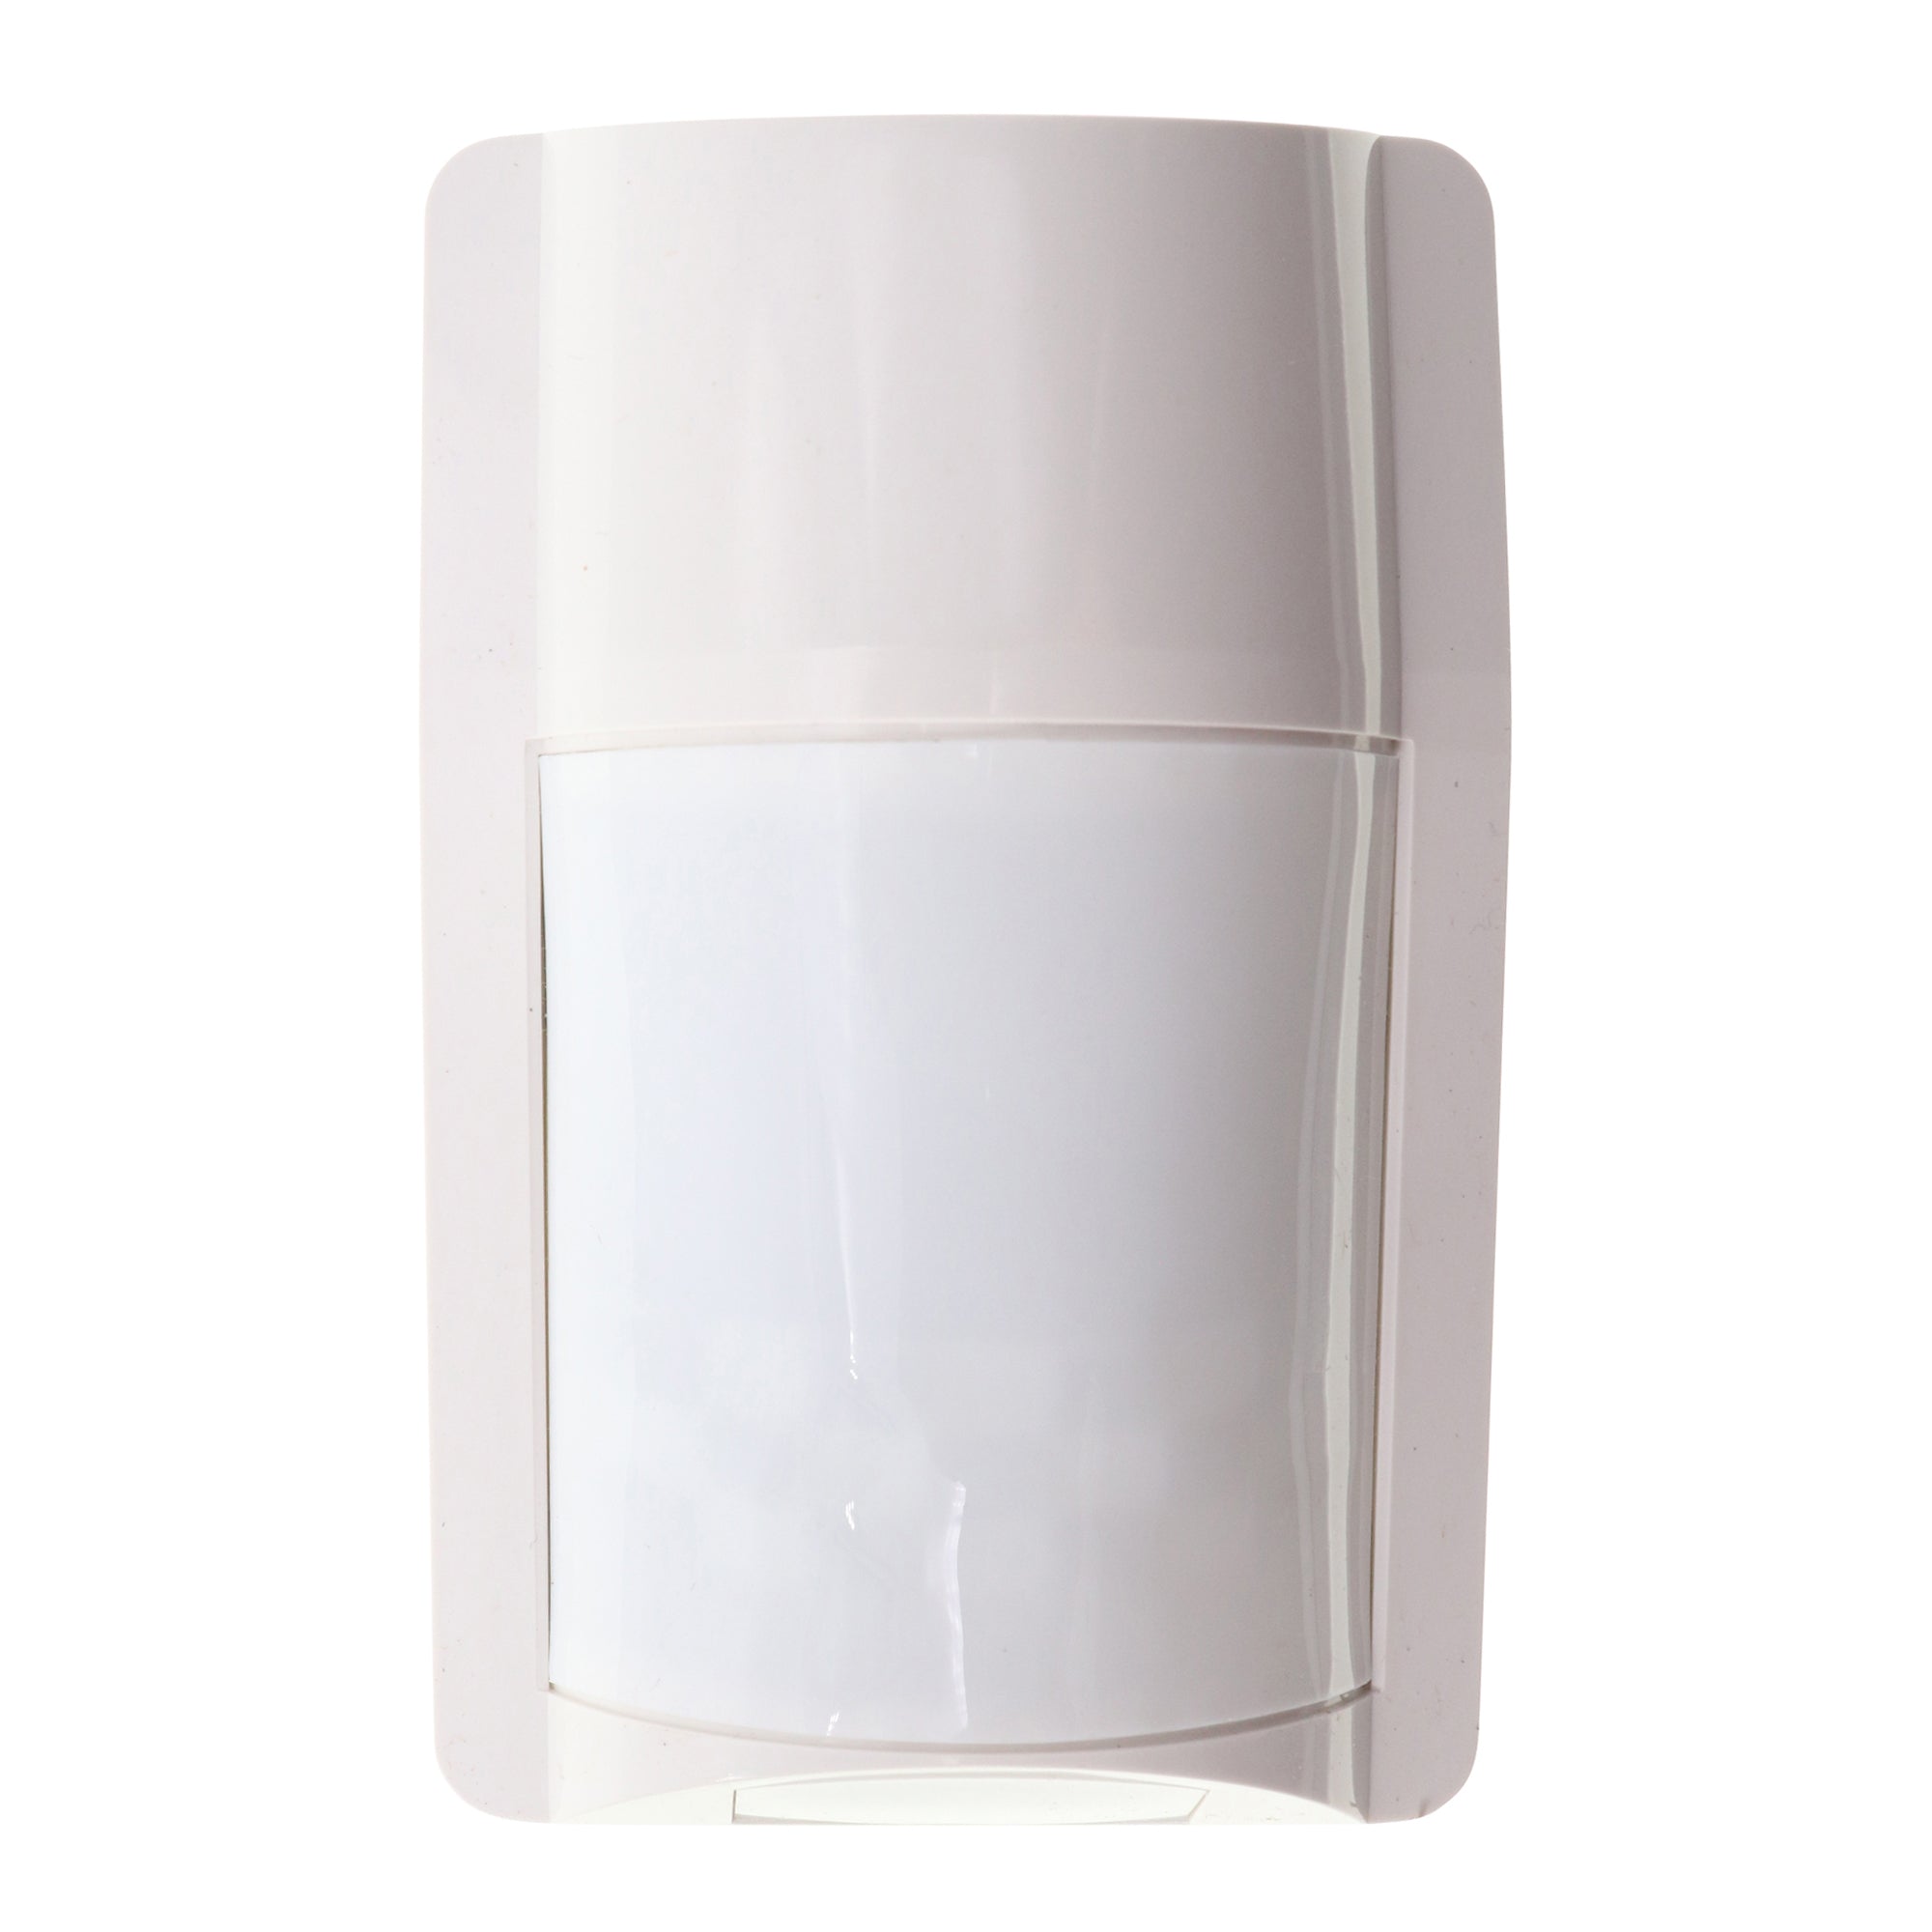 Digital Monitoring Products, DMP 1127W-W PIR WIRELESS MOTION DETECTOR, WIDE ANGLE, WALL MOUNT